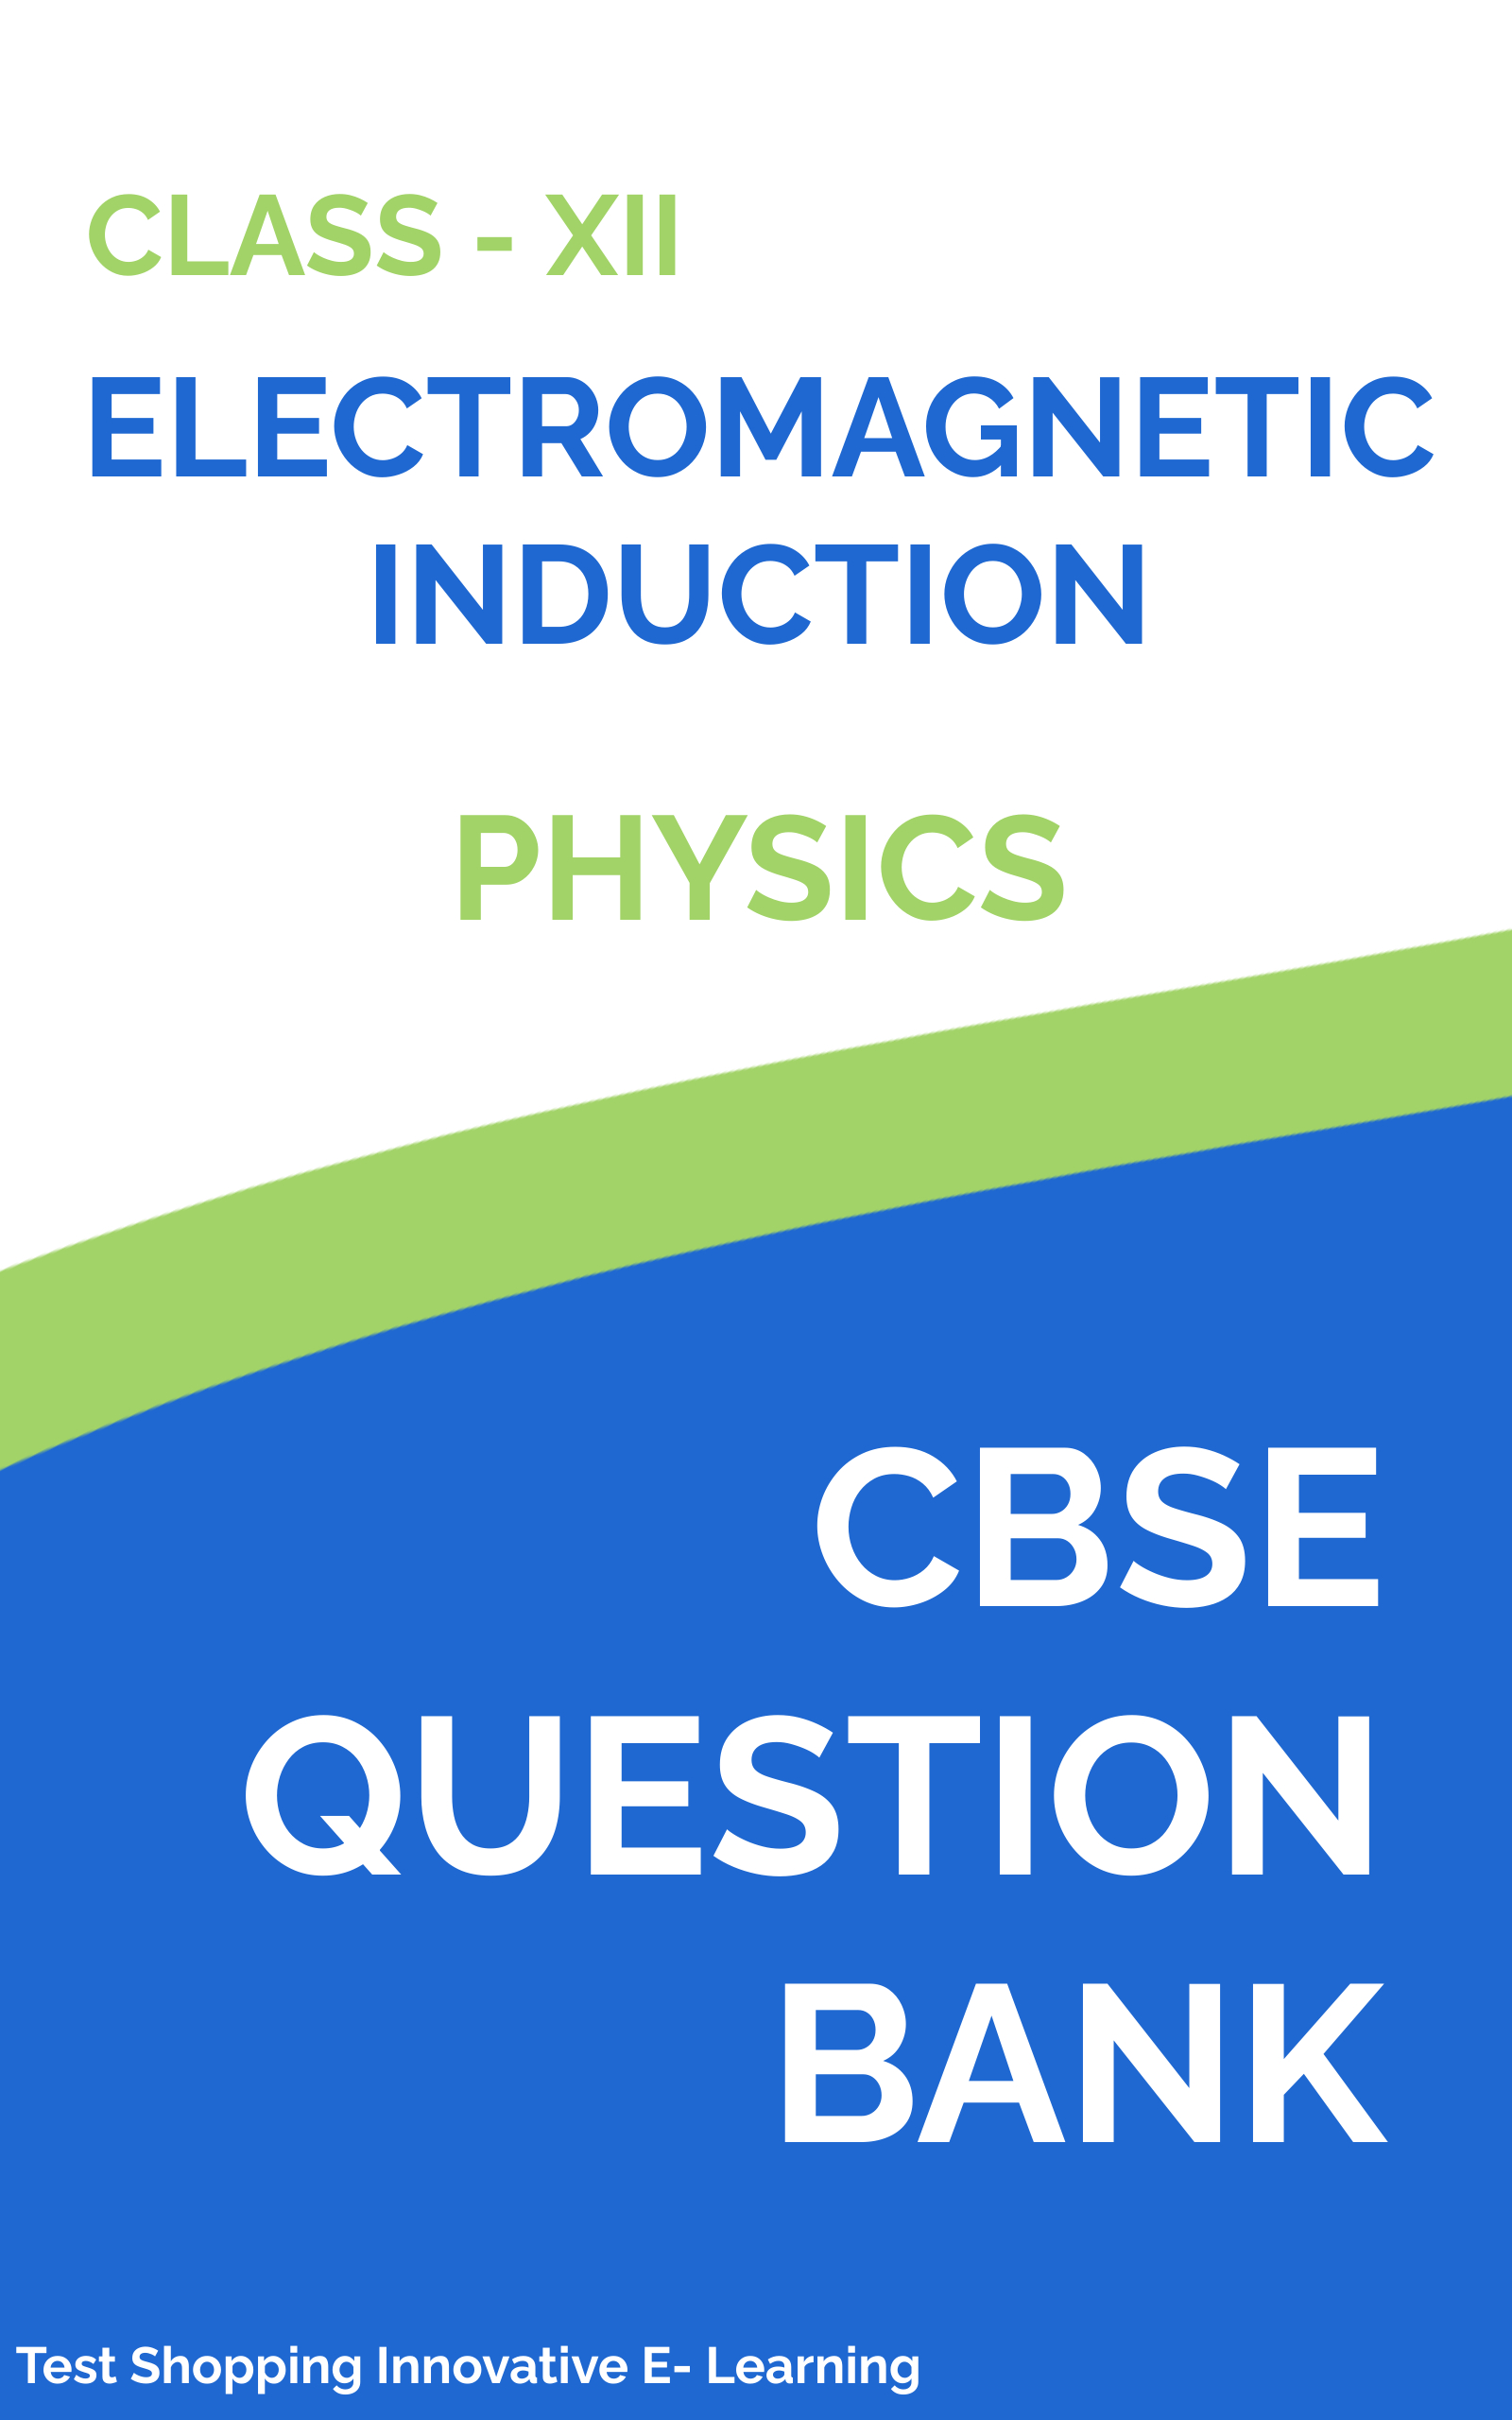 CBSE Physics Electromagnetic Induction Question Bank